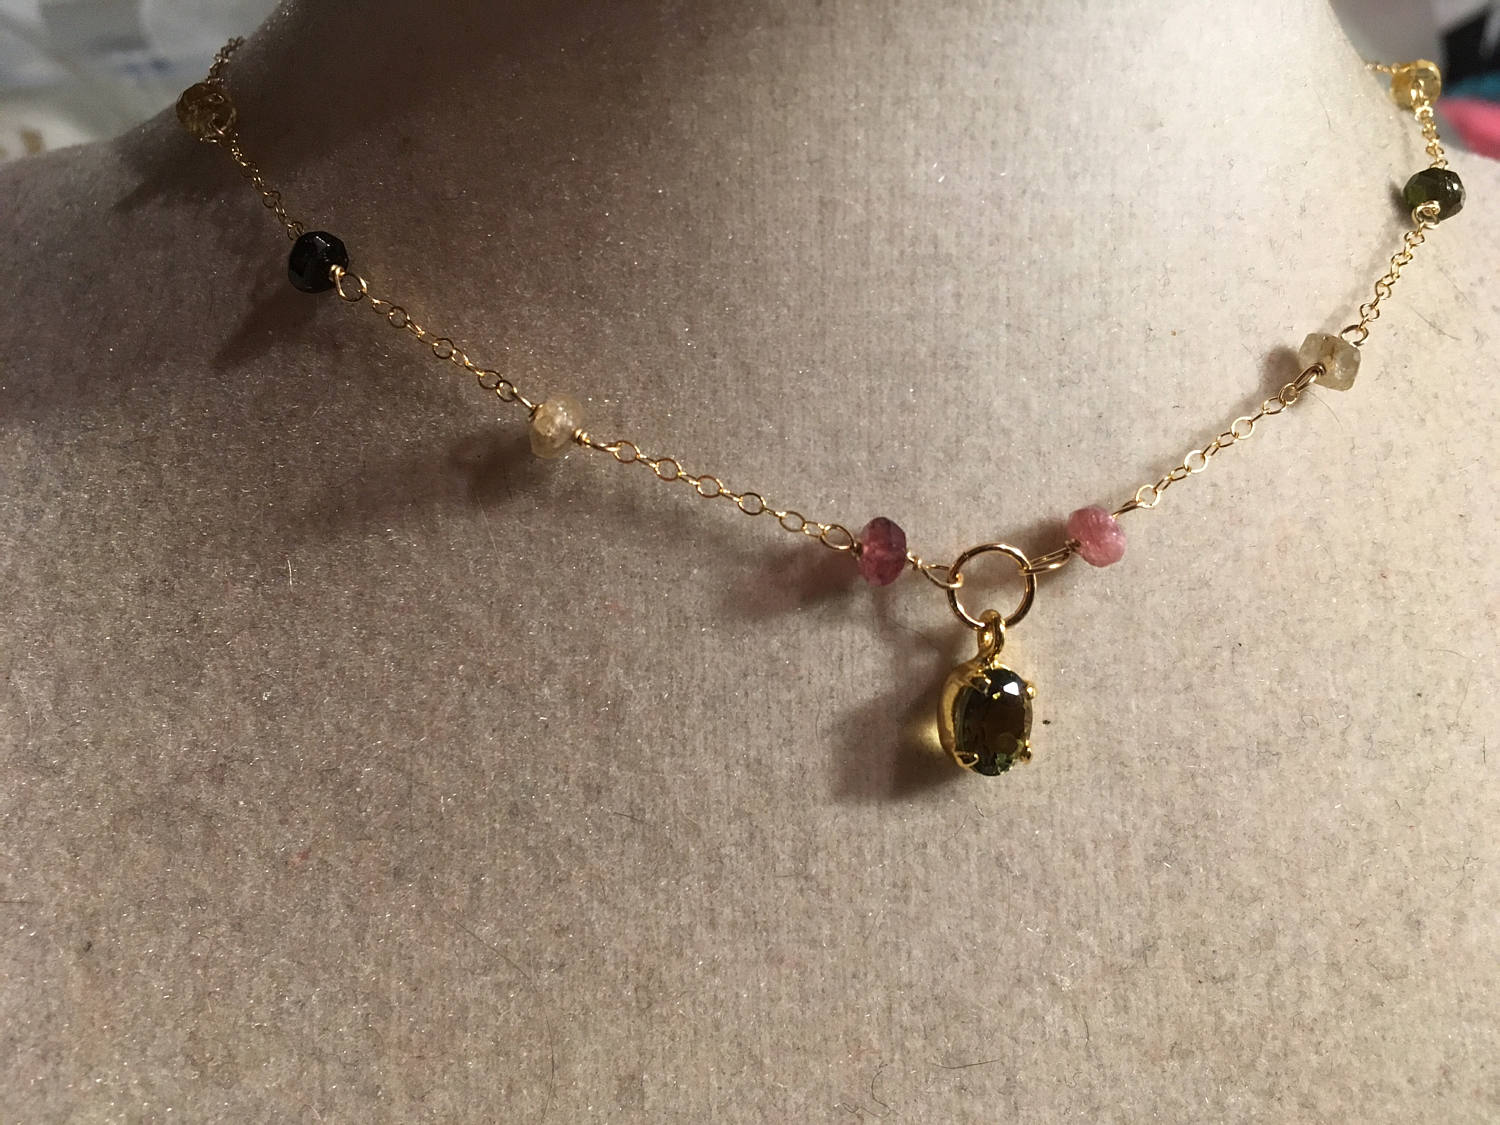 Watermelon Tourmaline Necklace - Pink Green And Gold Filled Jewellery - Gemstone Jewelry - Dainty Chain - Pendant